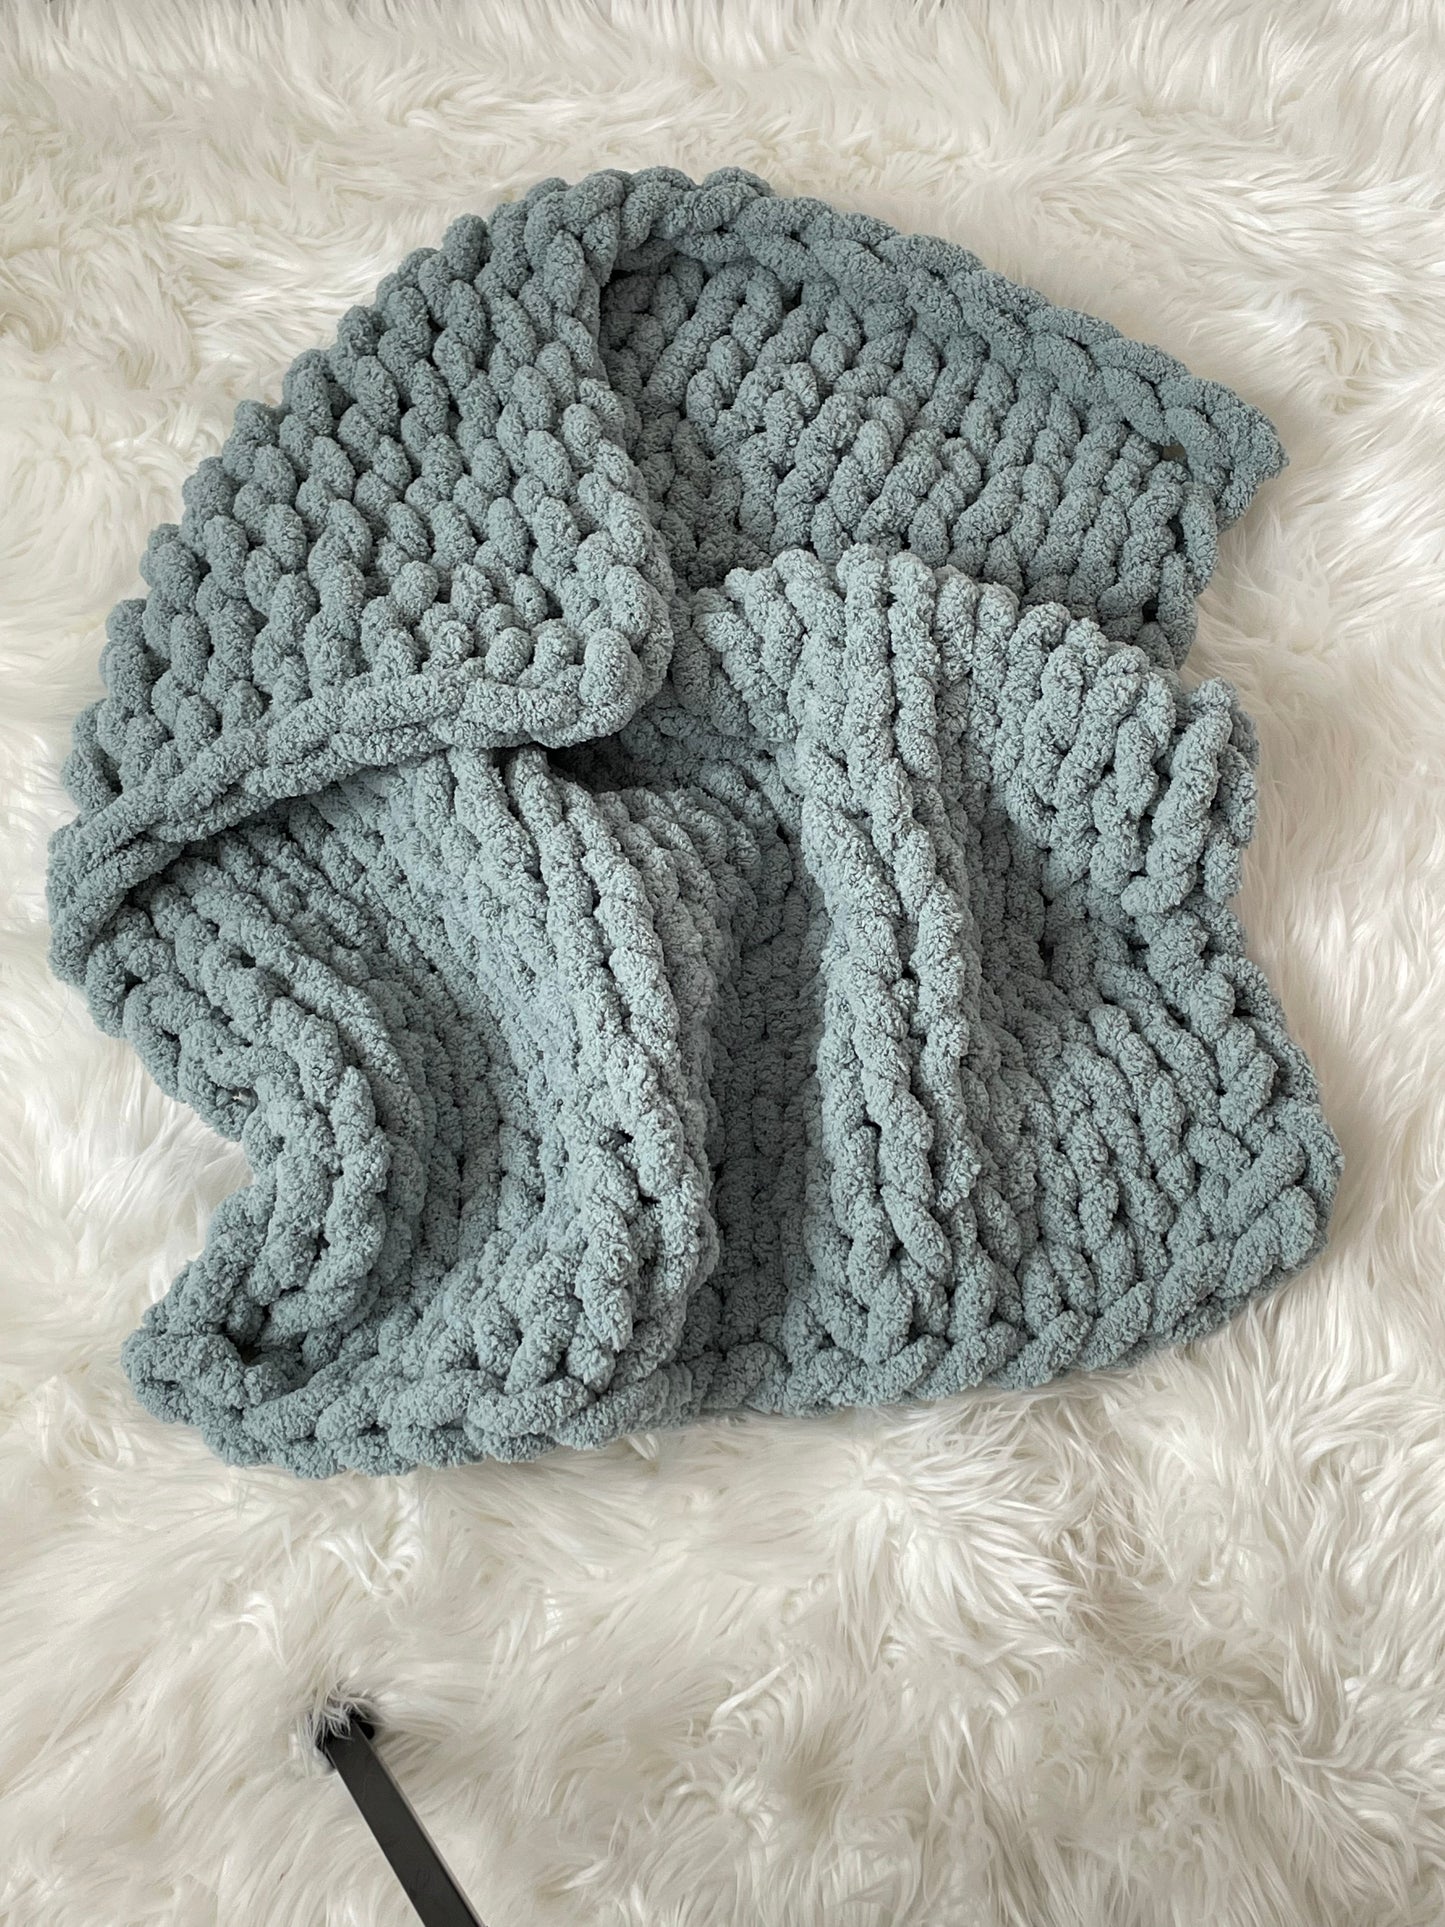 Healing Hand, Chunky Knit Baby Blankets